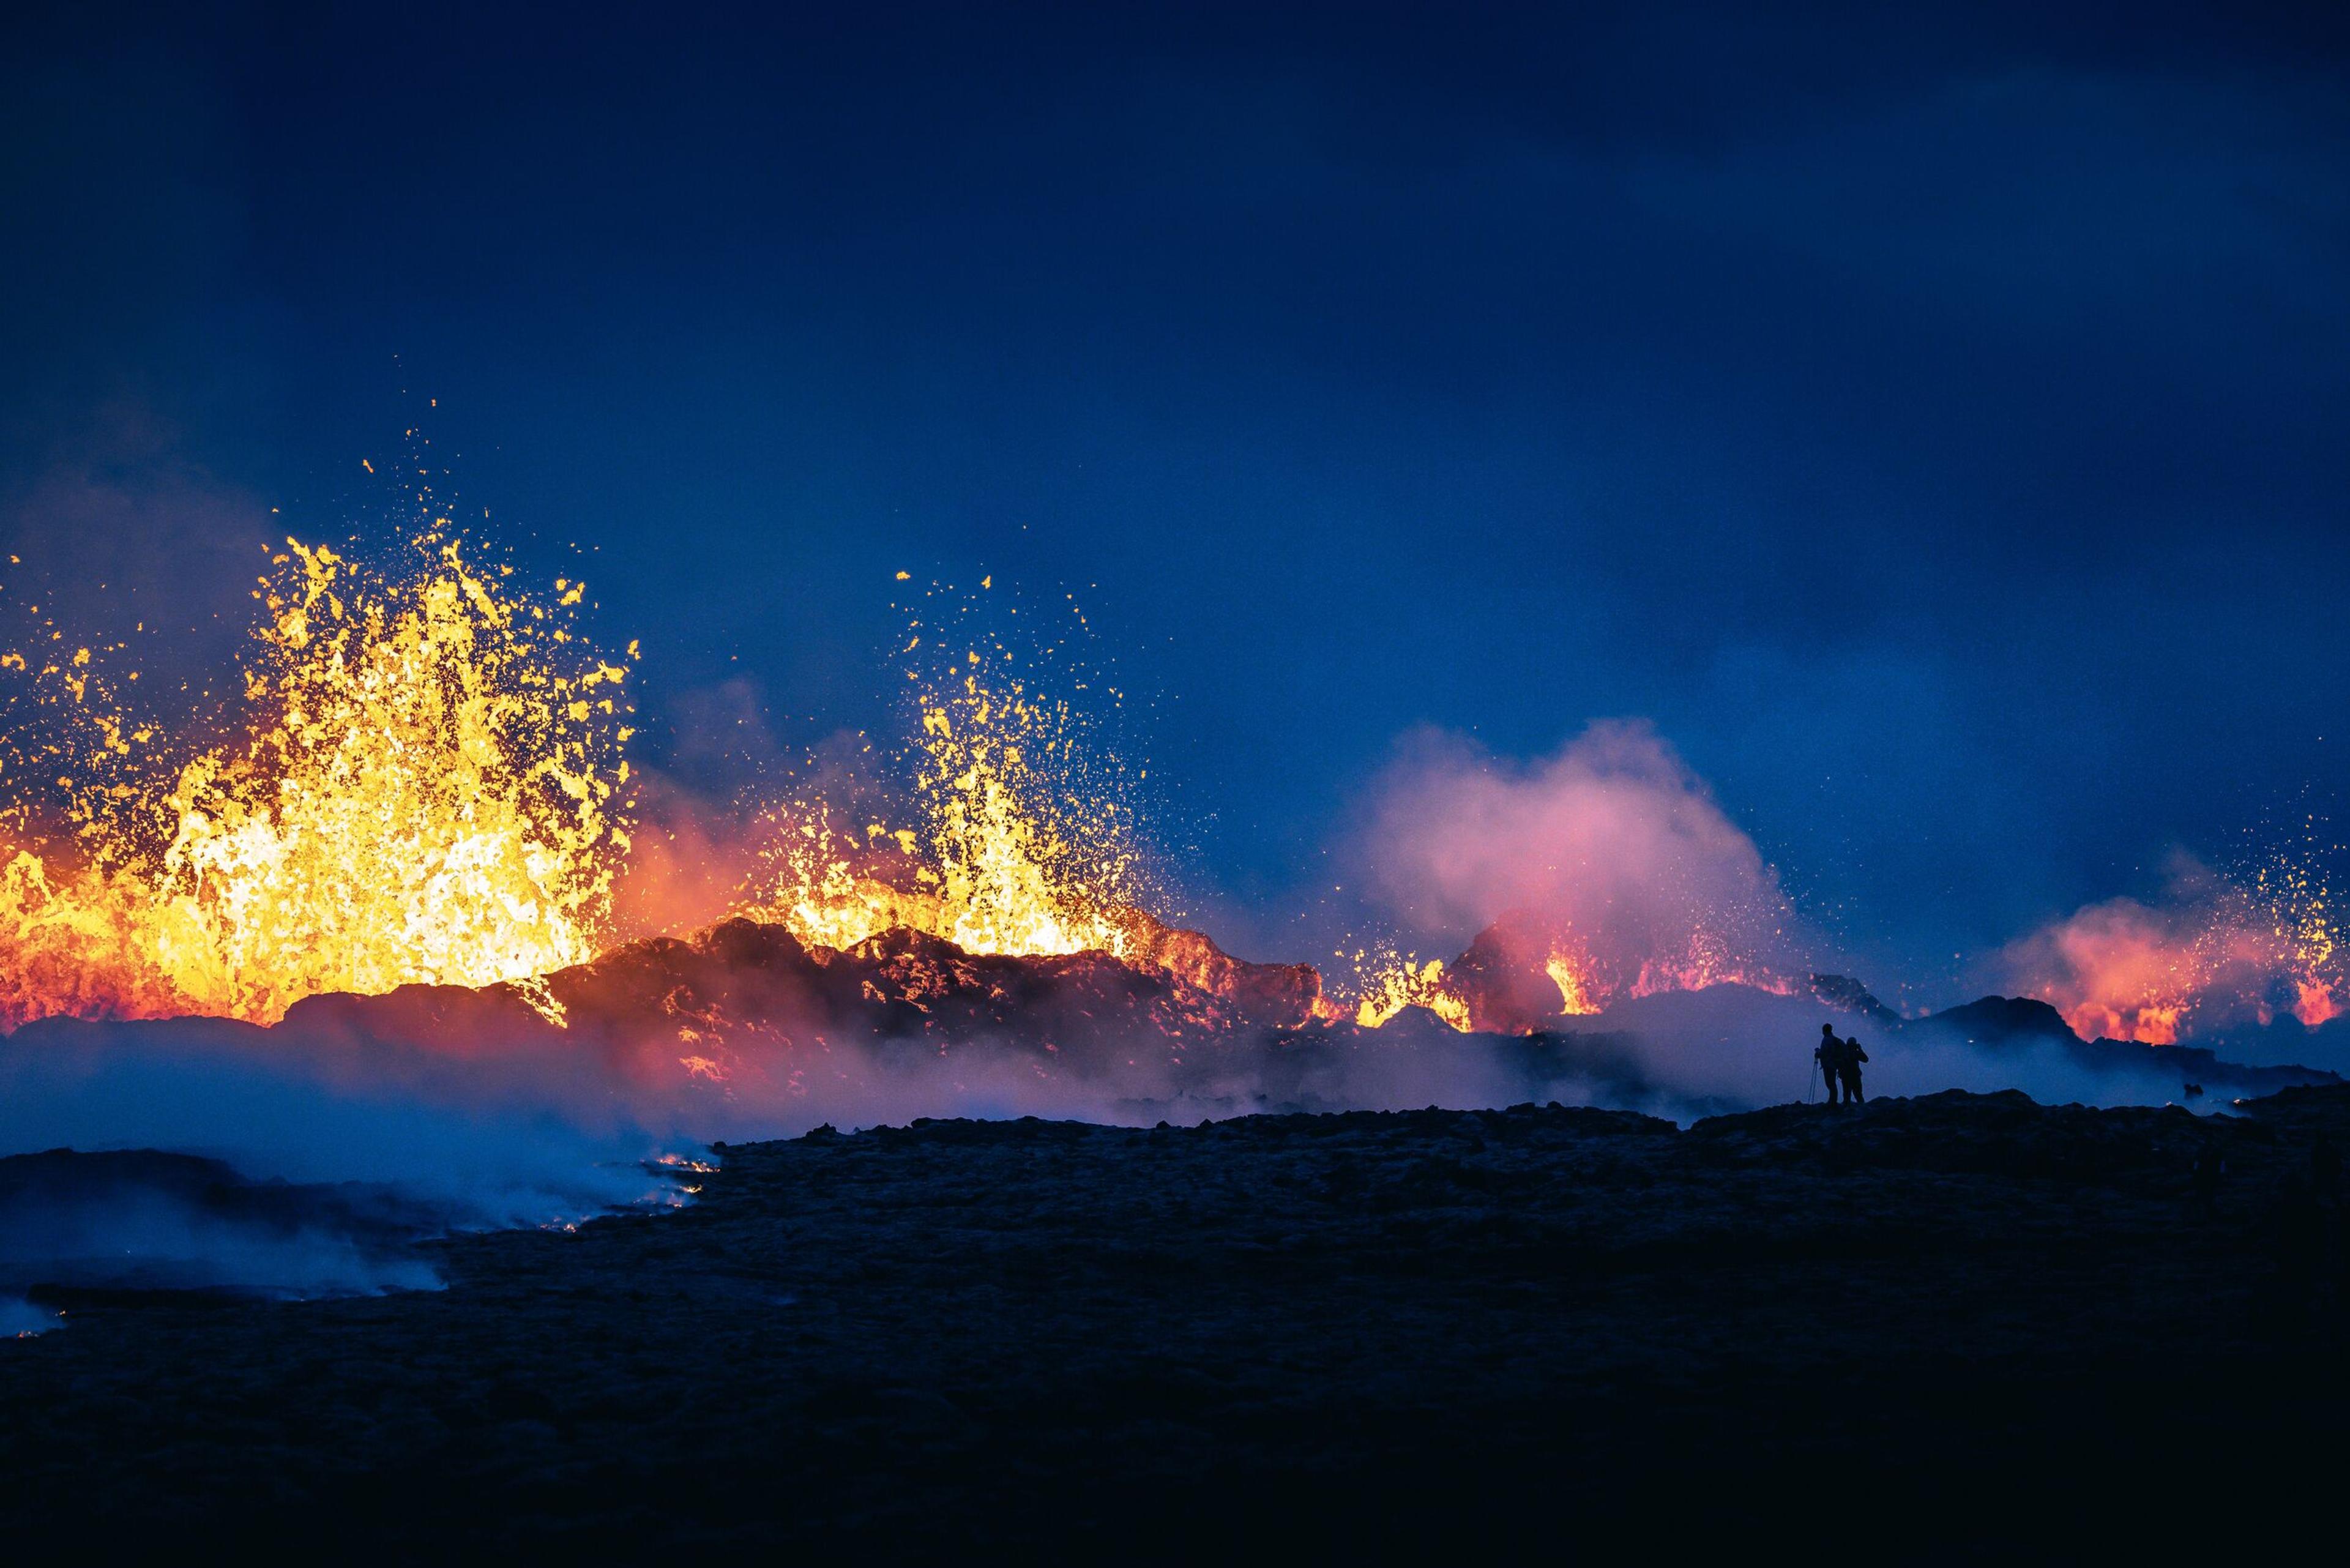 Silhouetted figure against fiery volcanic eruption at twilight, with intense blue smoke and orange lava flames.